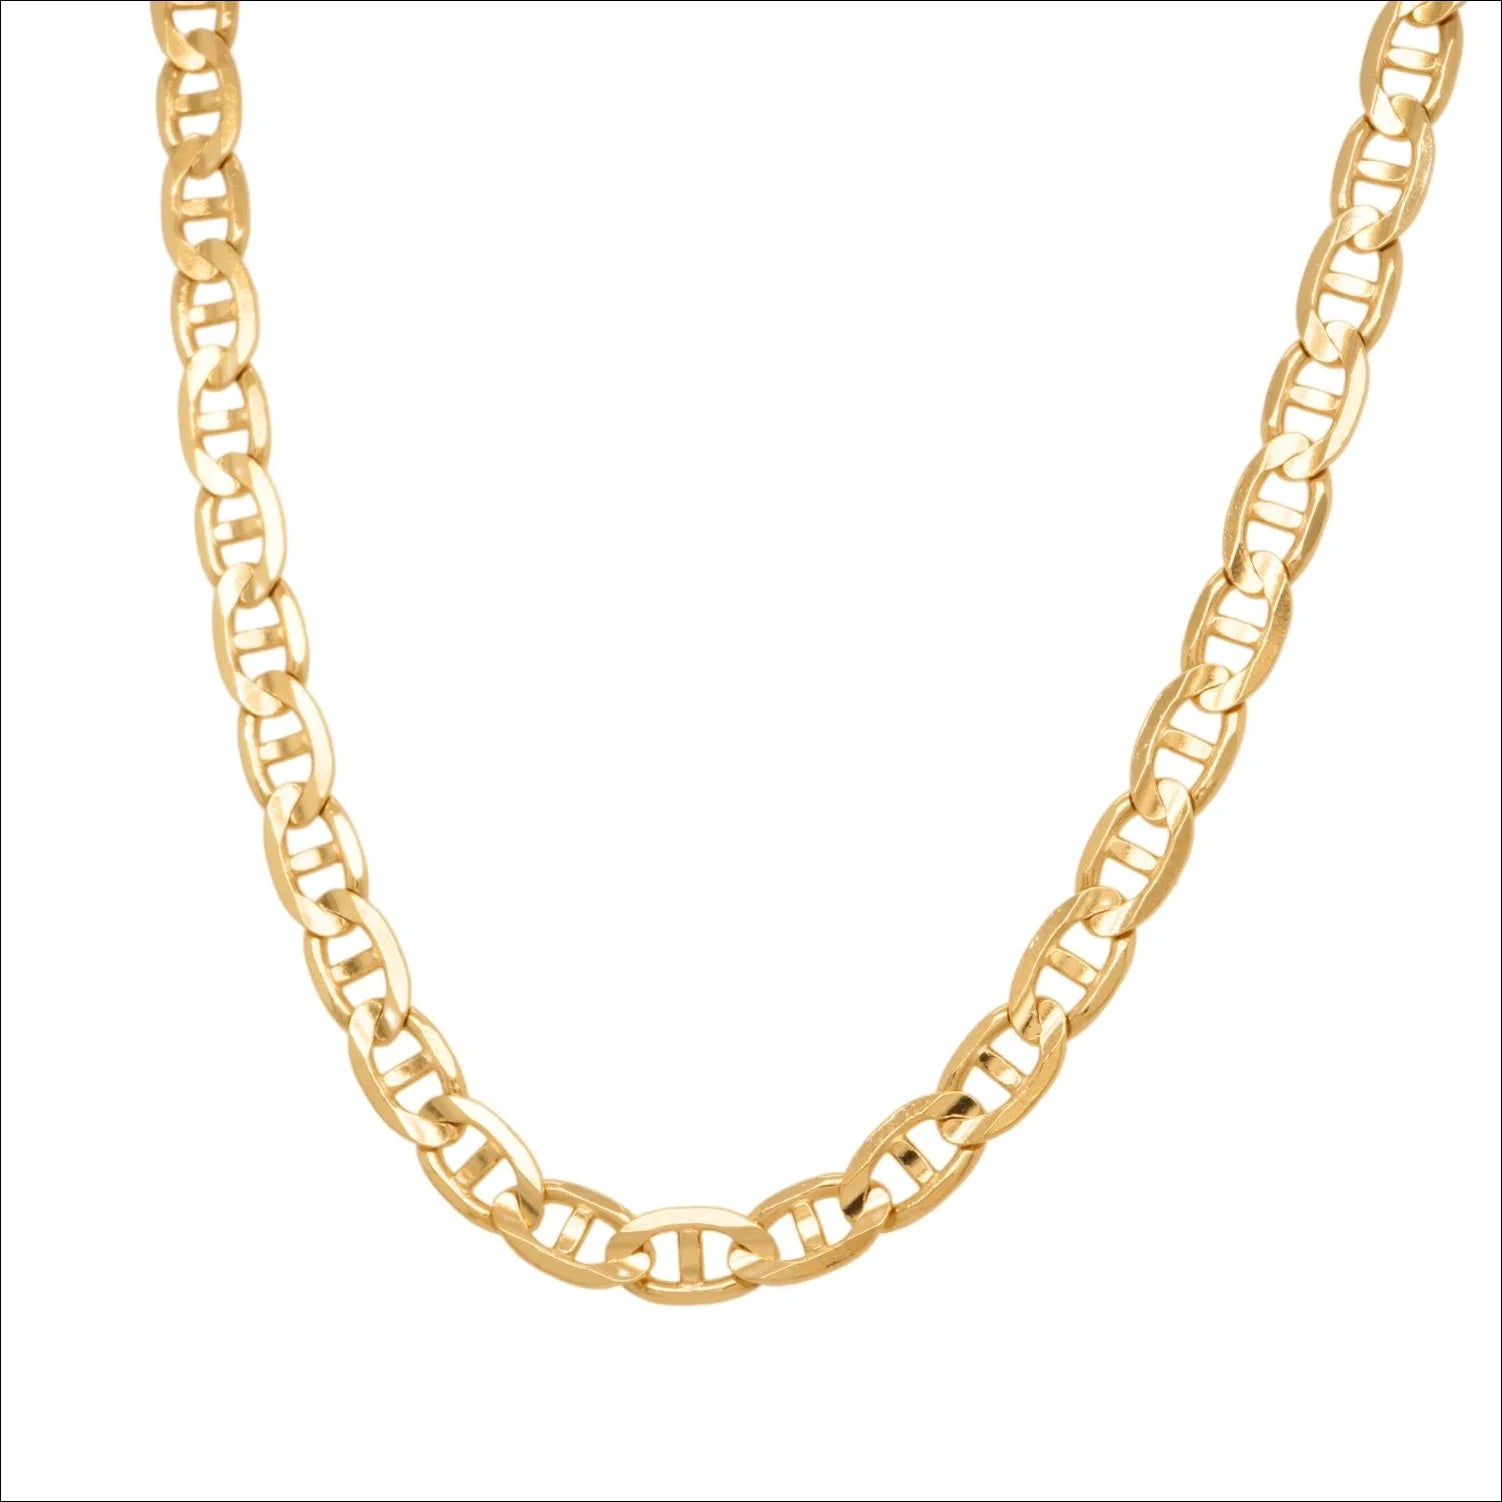 Exclusive 18k Gold Anchor Chain | Above $1000